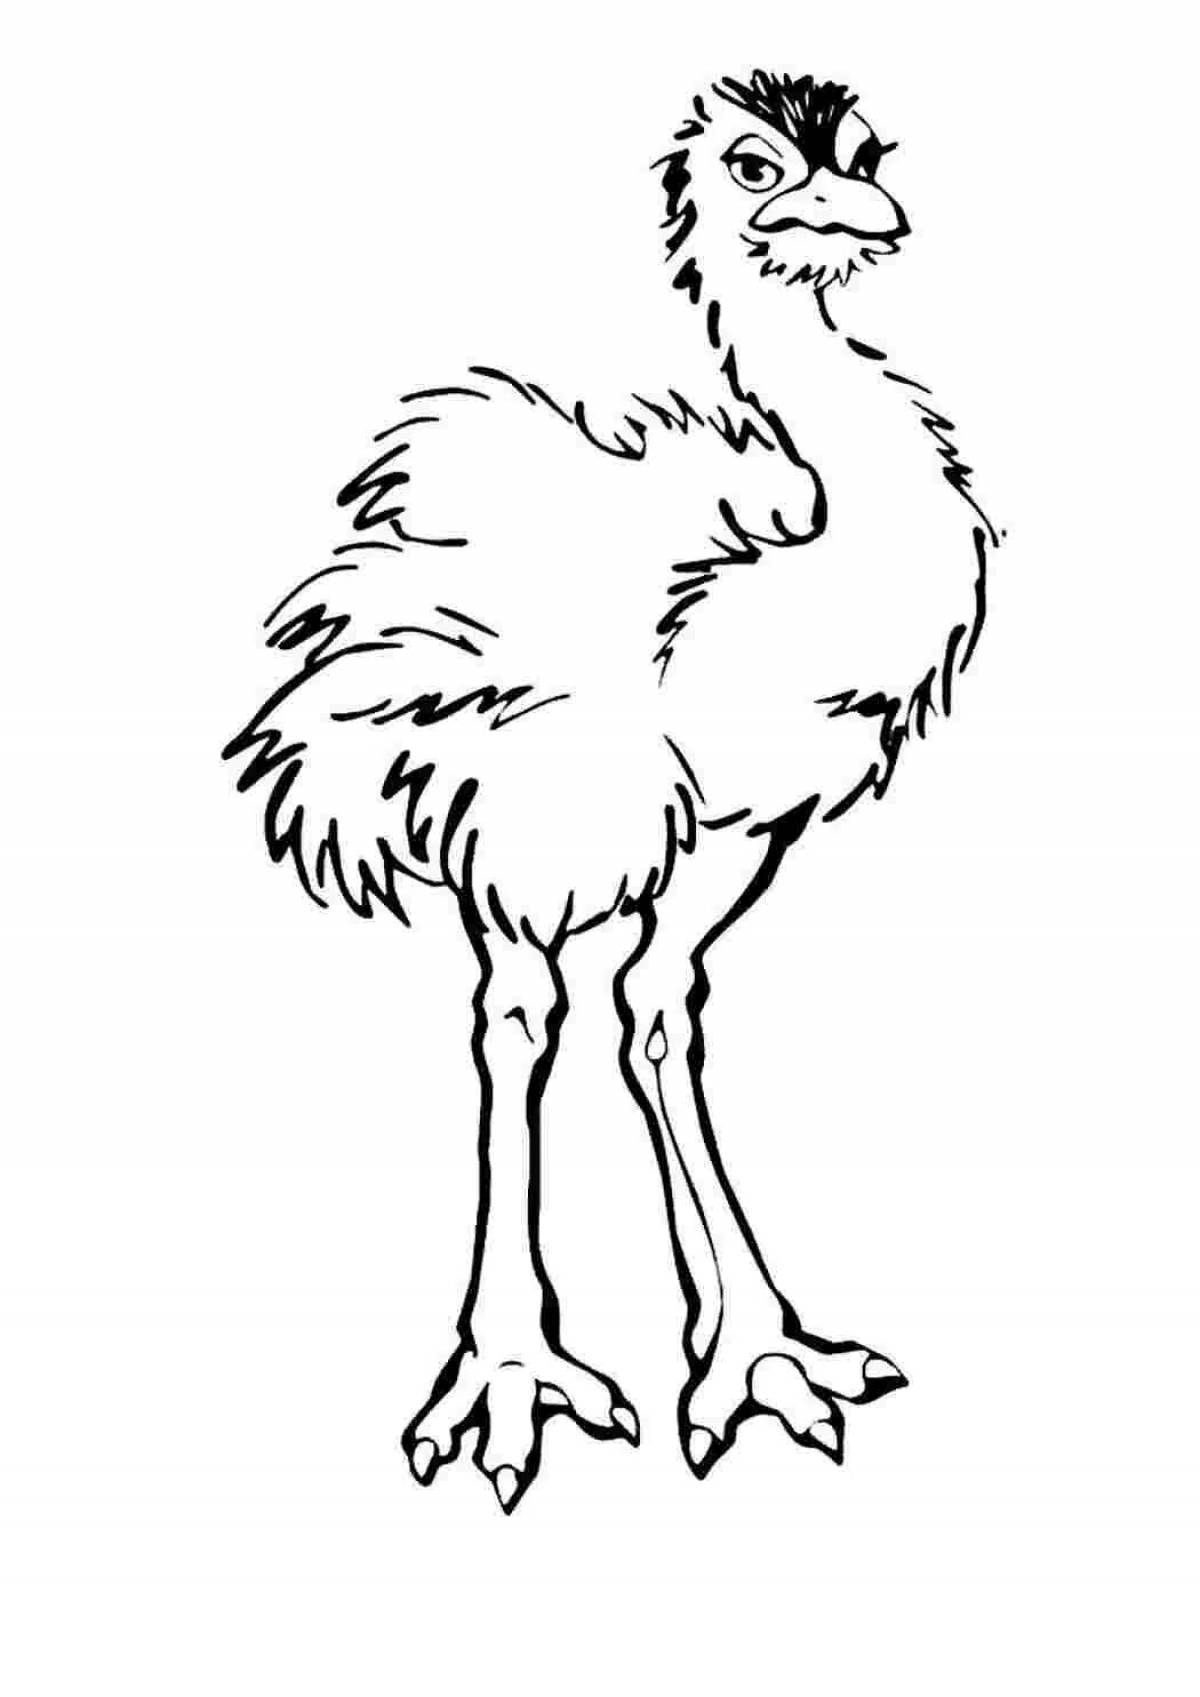 Exciting emu ostrich coloring book